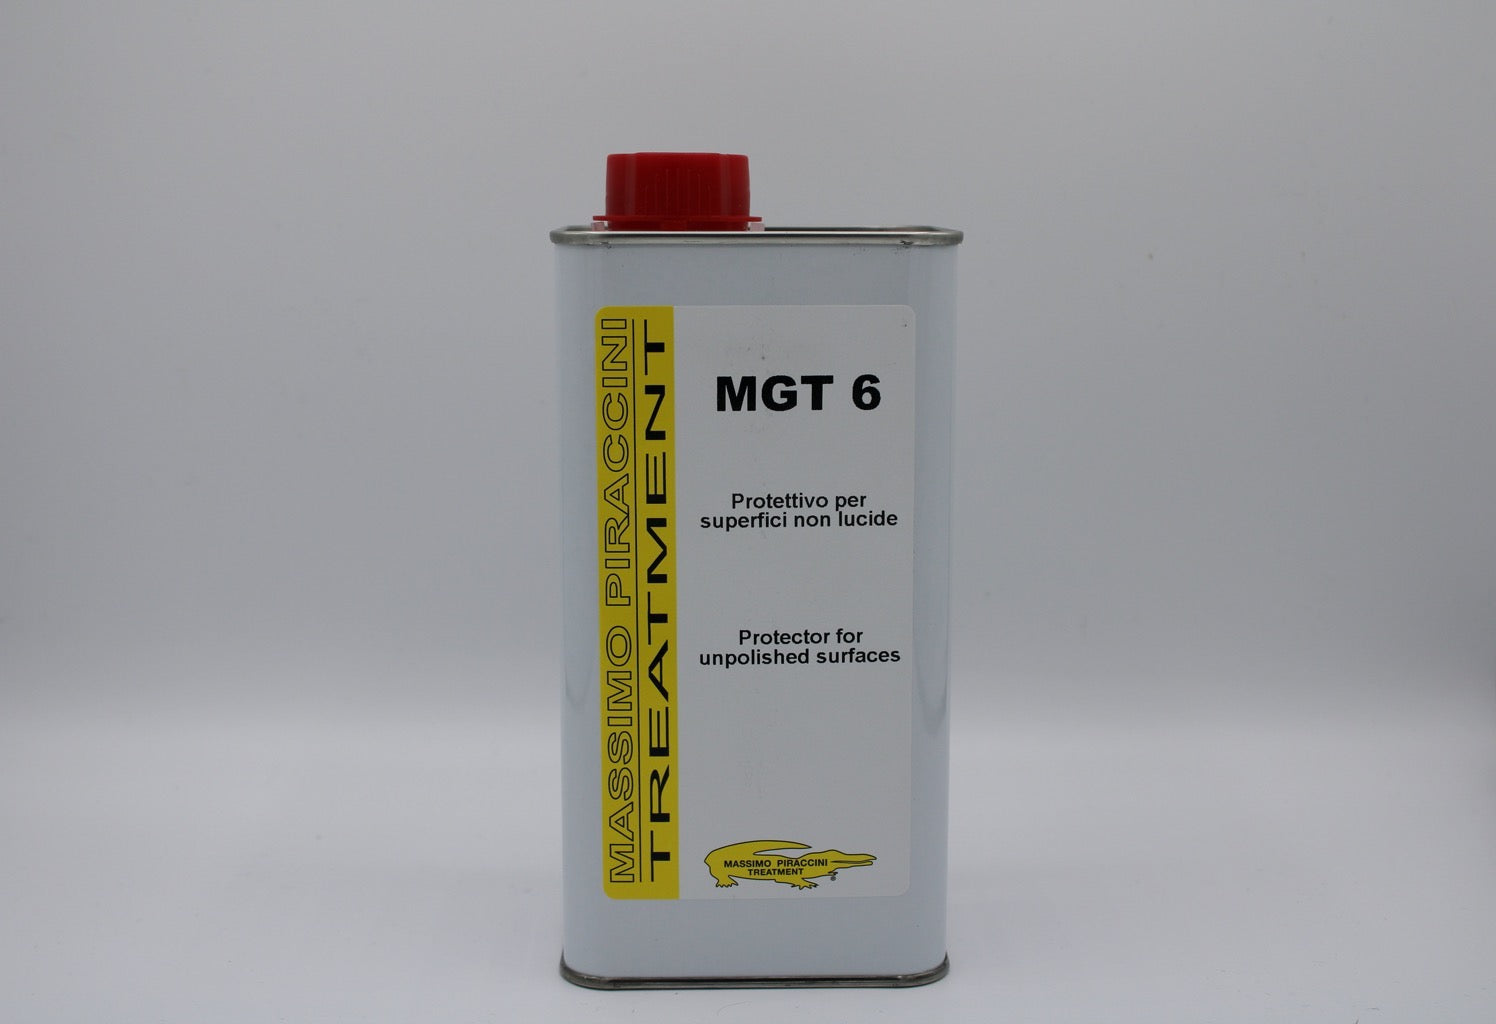 MGT 6 – Anti-stain protector, concentrated, neutral, specific for matt or absorbing surfaces